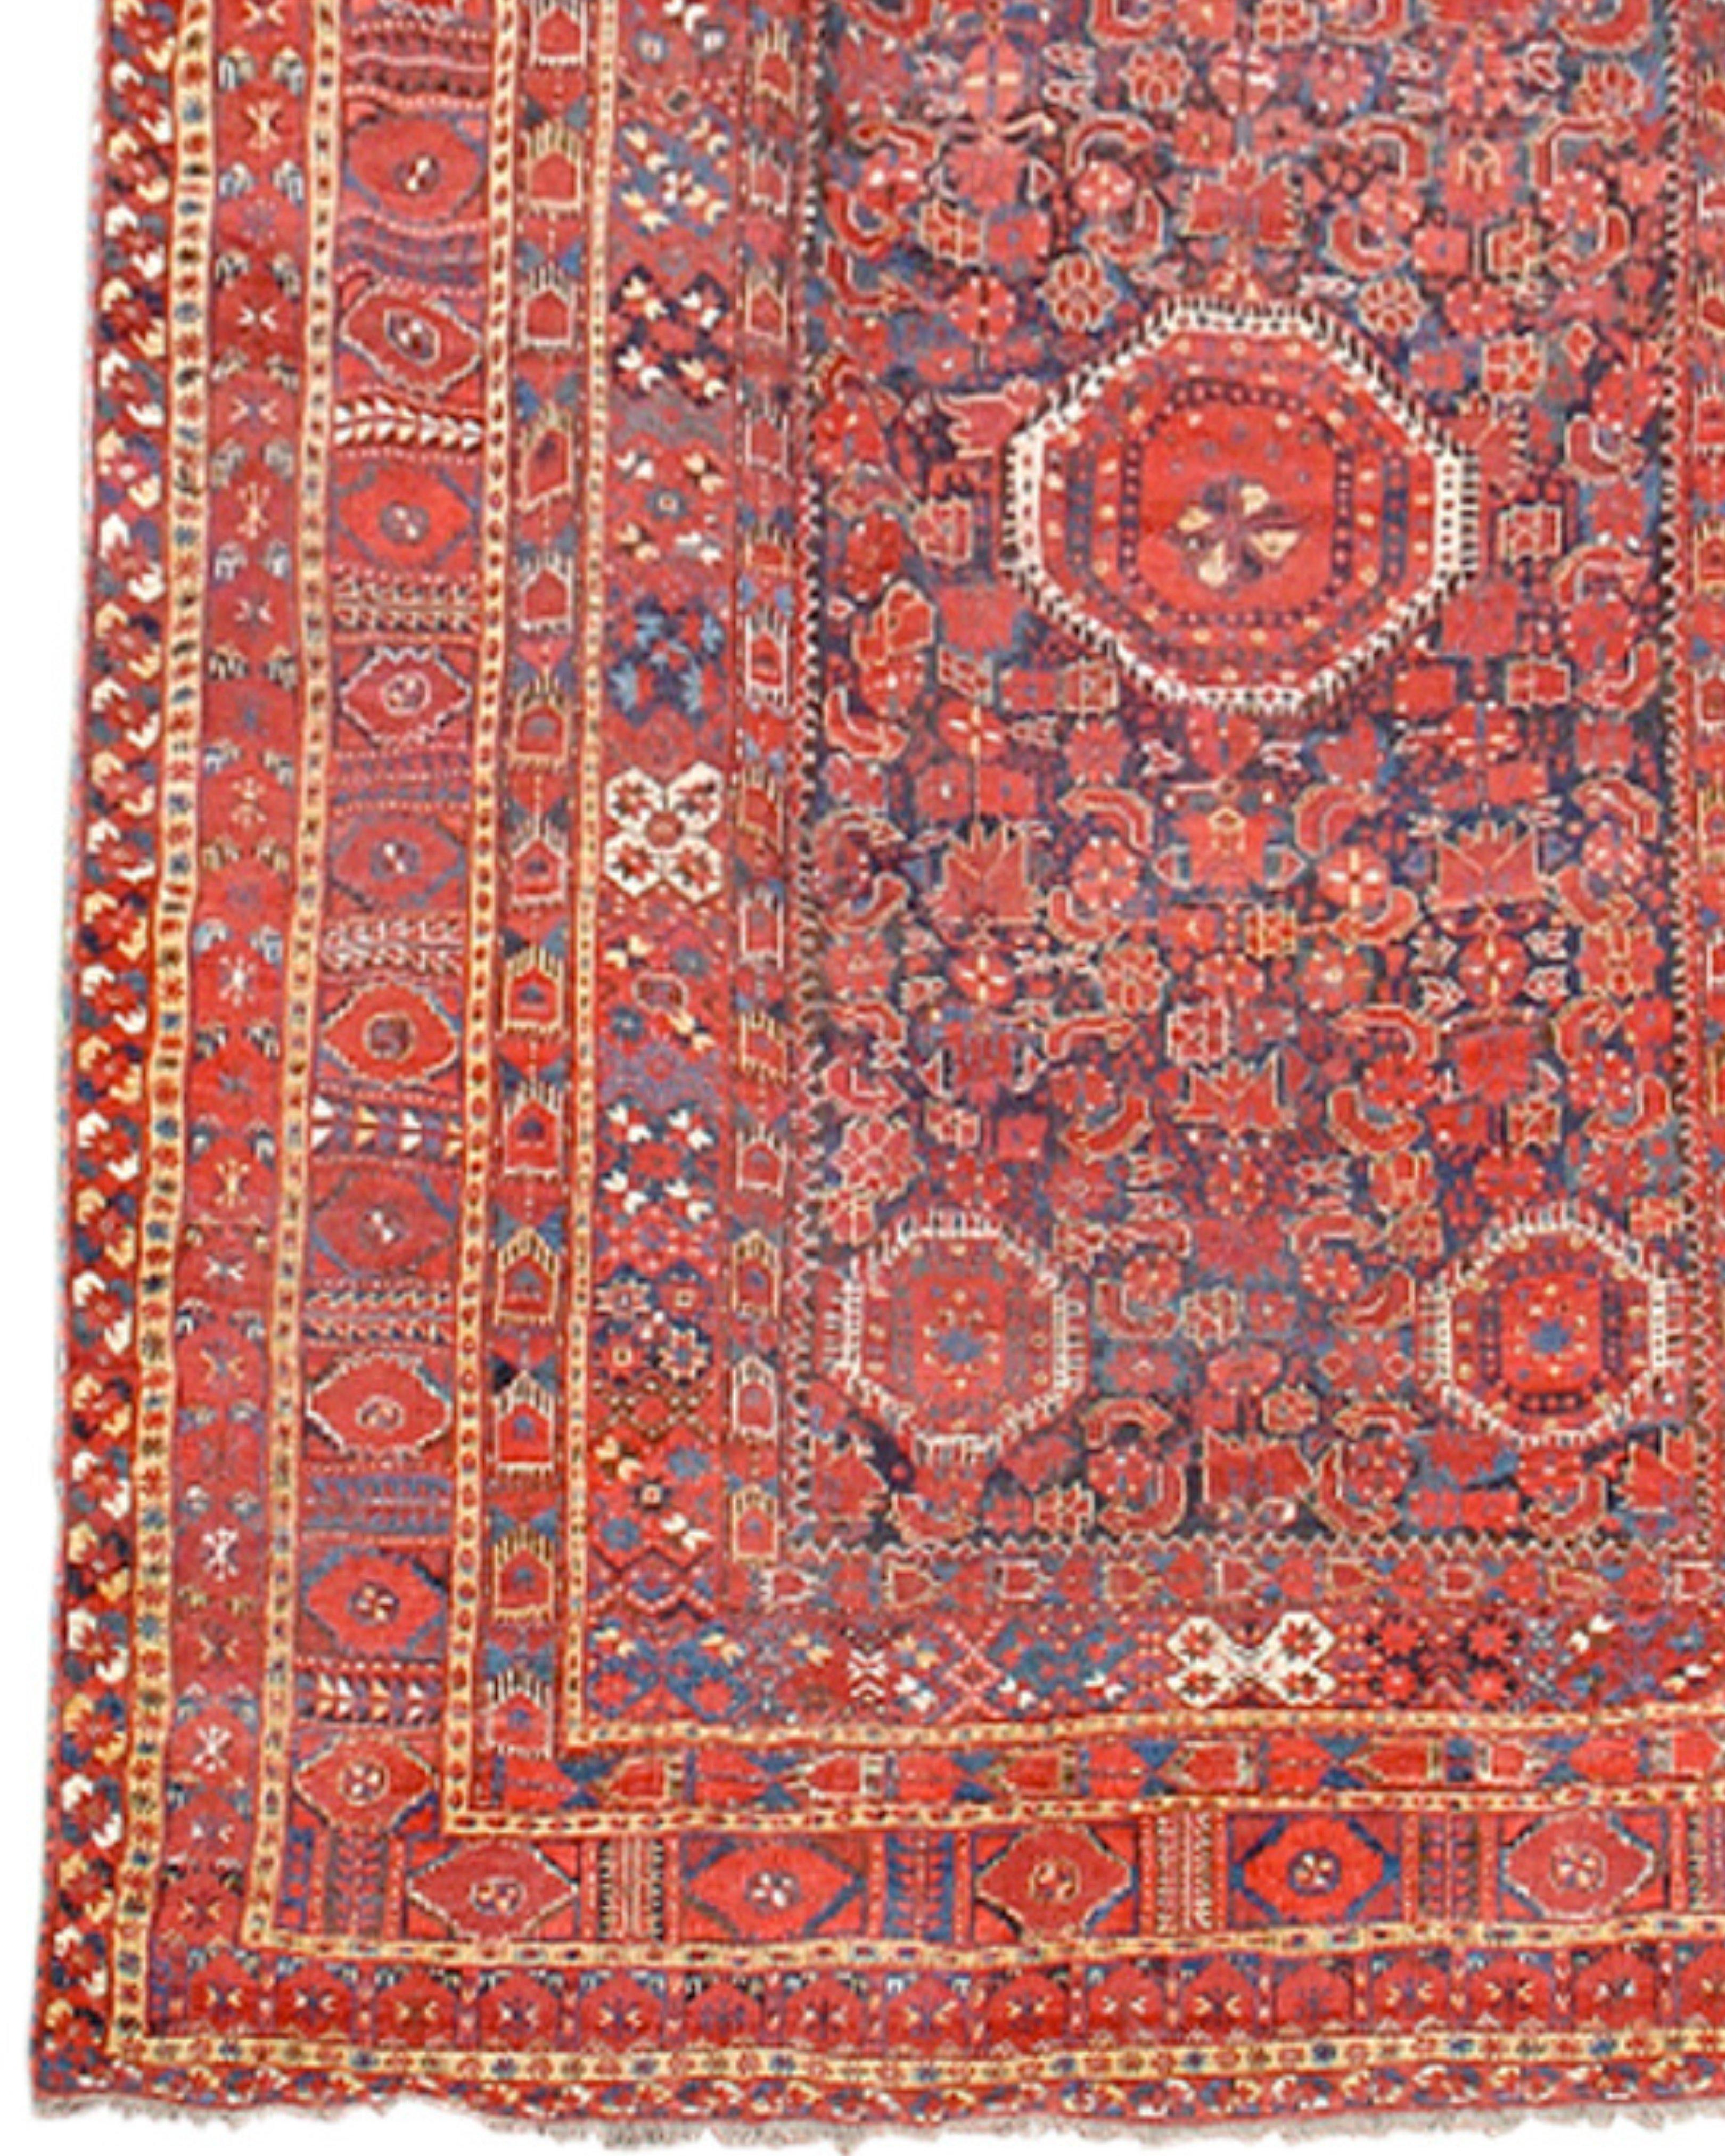 Antique Large Uzbek Bashir Long Rug, 19th Century In Excellent Condition For Sale In San Francisco, CA